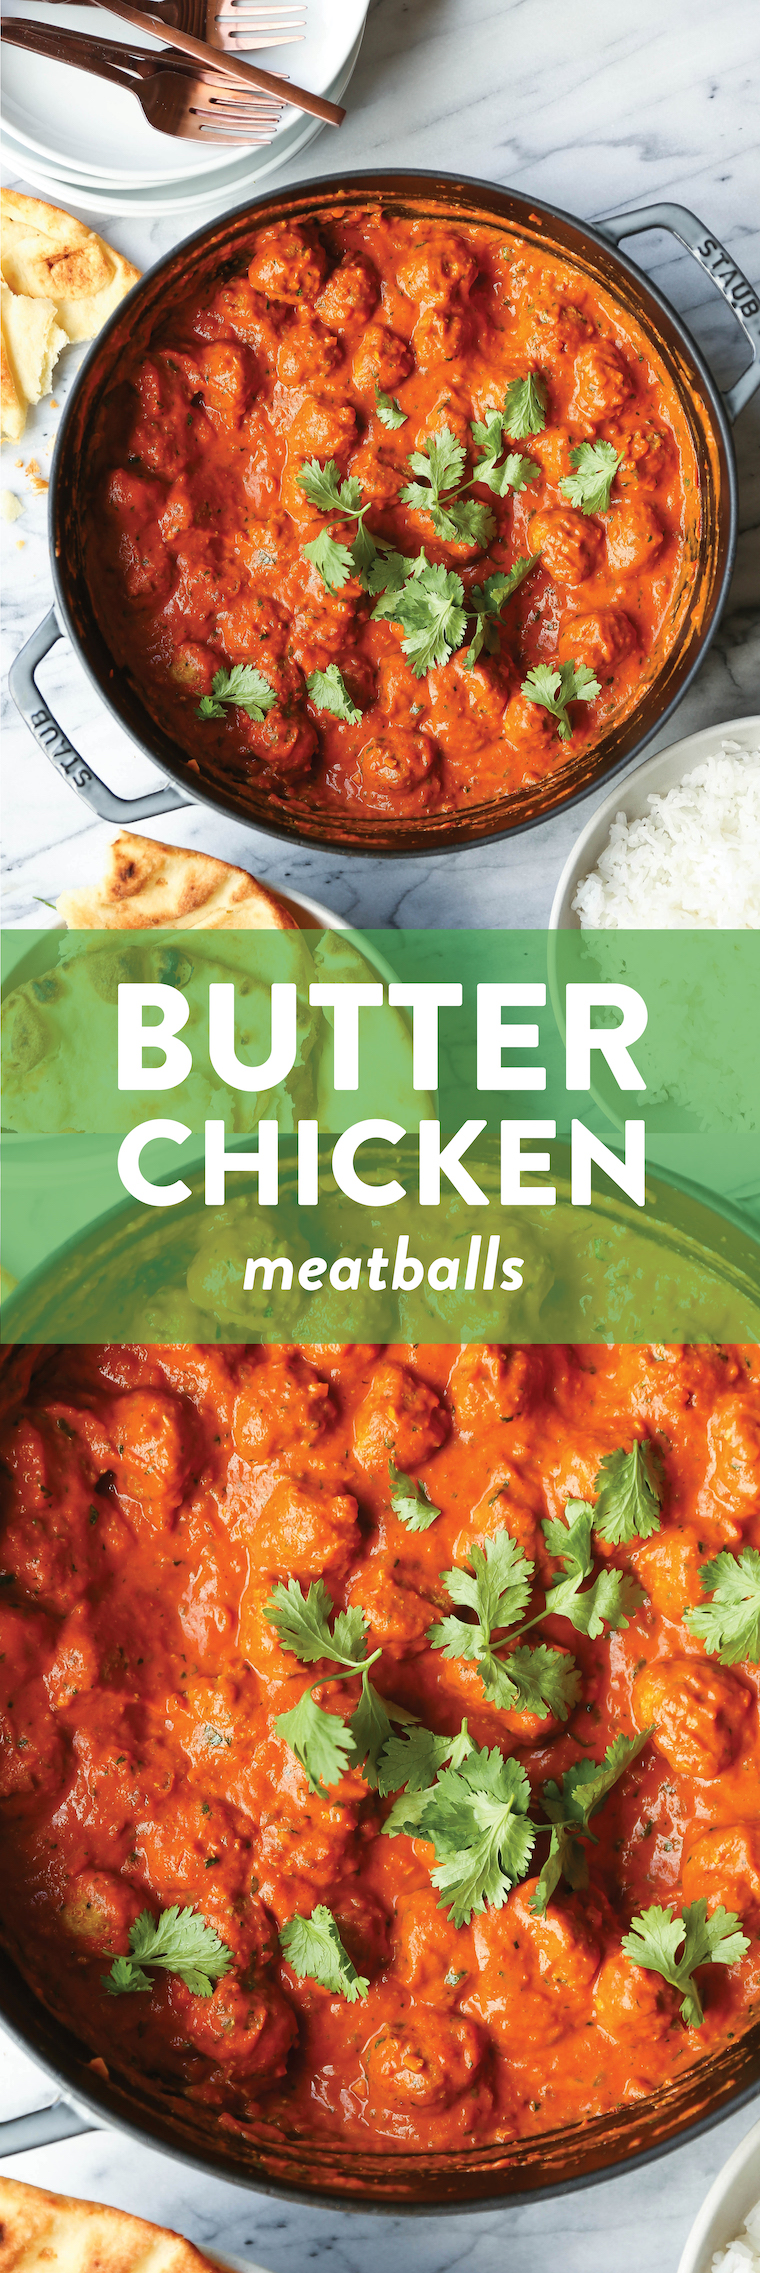 Butter Chicken Meatballs - Everyone's favorite butter chicken made into the most tender, most amazing meatballs! So saucy, so good. Serve with rice + naan!